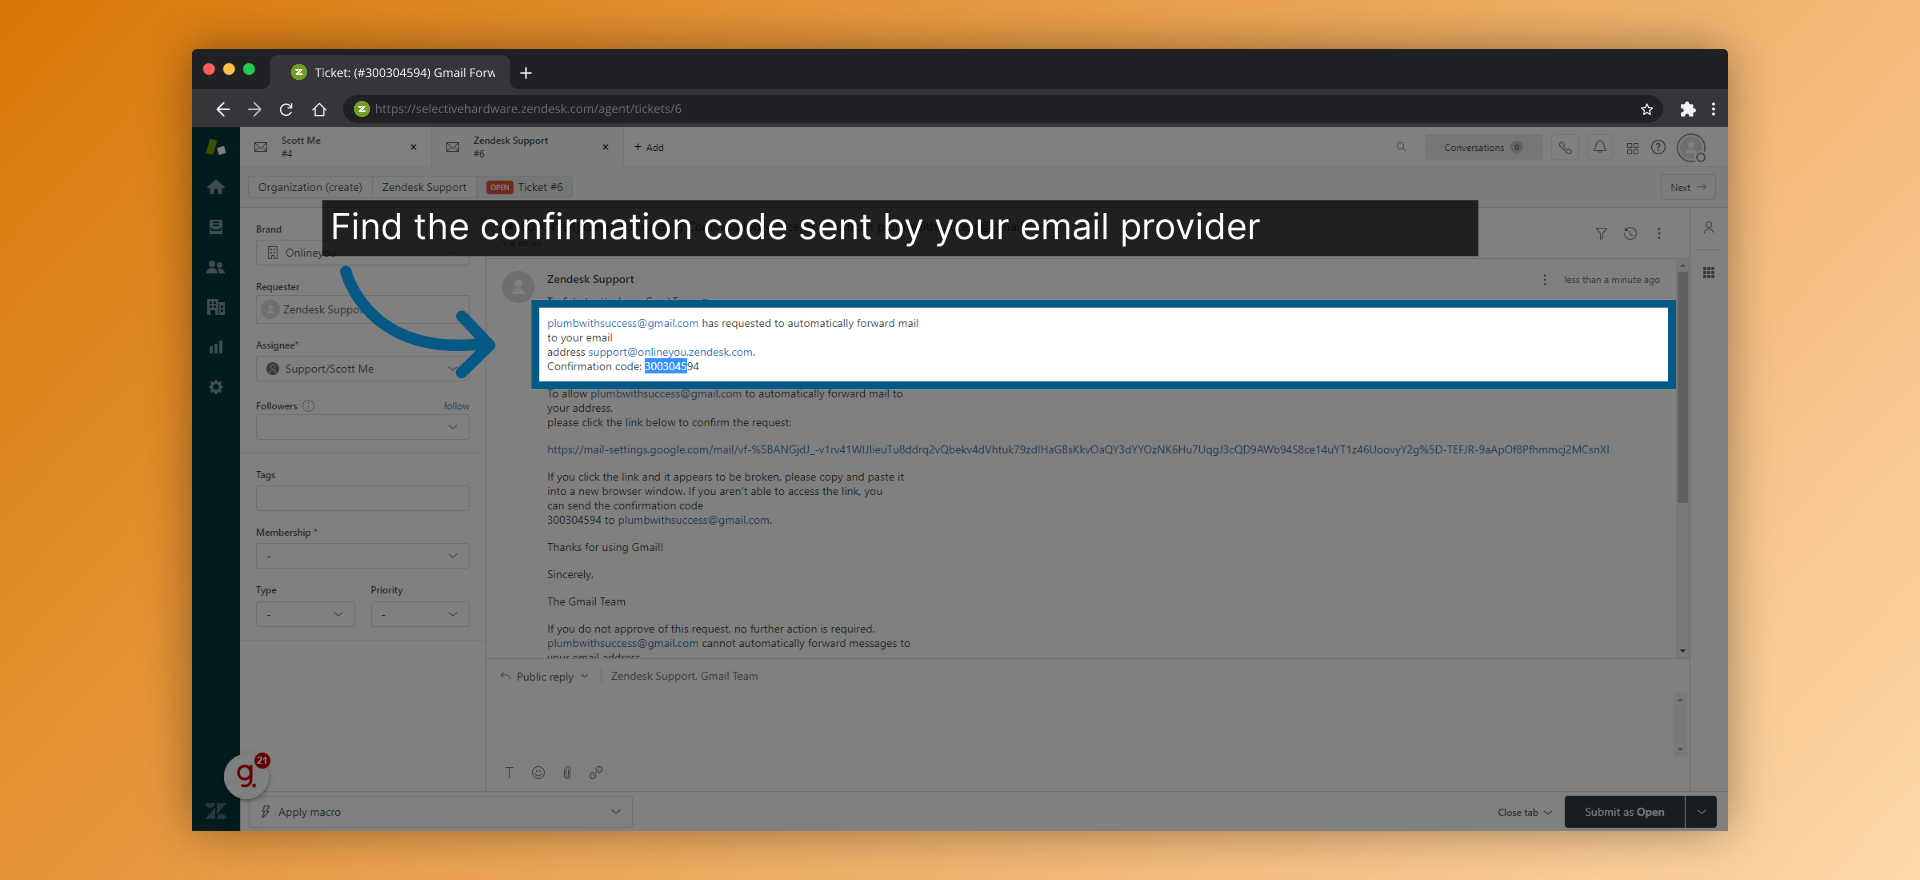 Find the confirmation code sent by your email provider